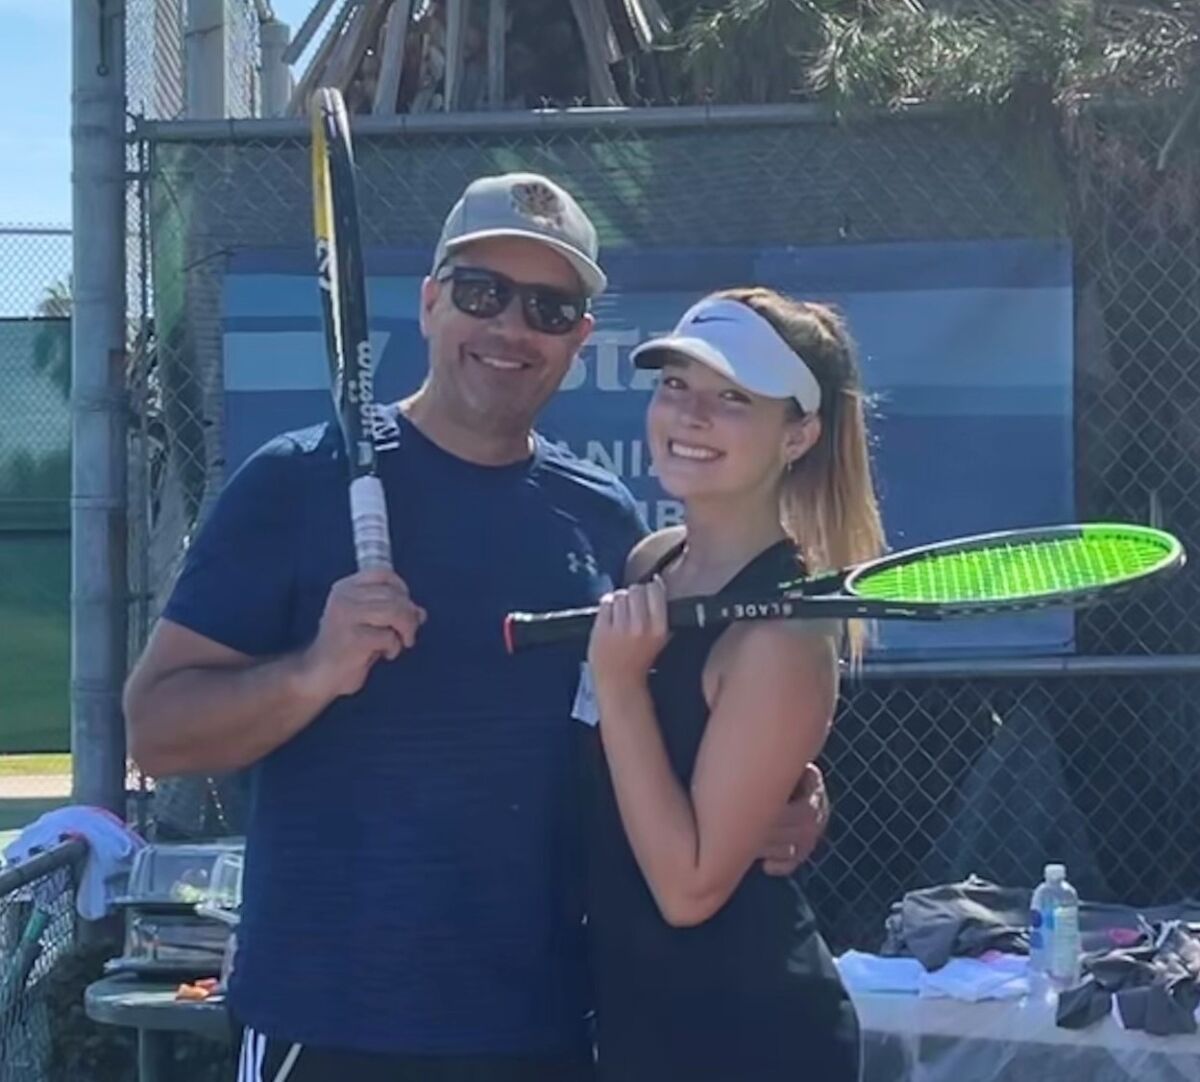 Avery Wulf, pictured with her father, Jeff, has been on the Point Loma High varsity tennis team the past two years.